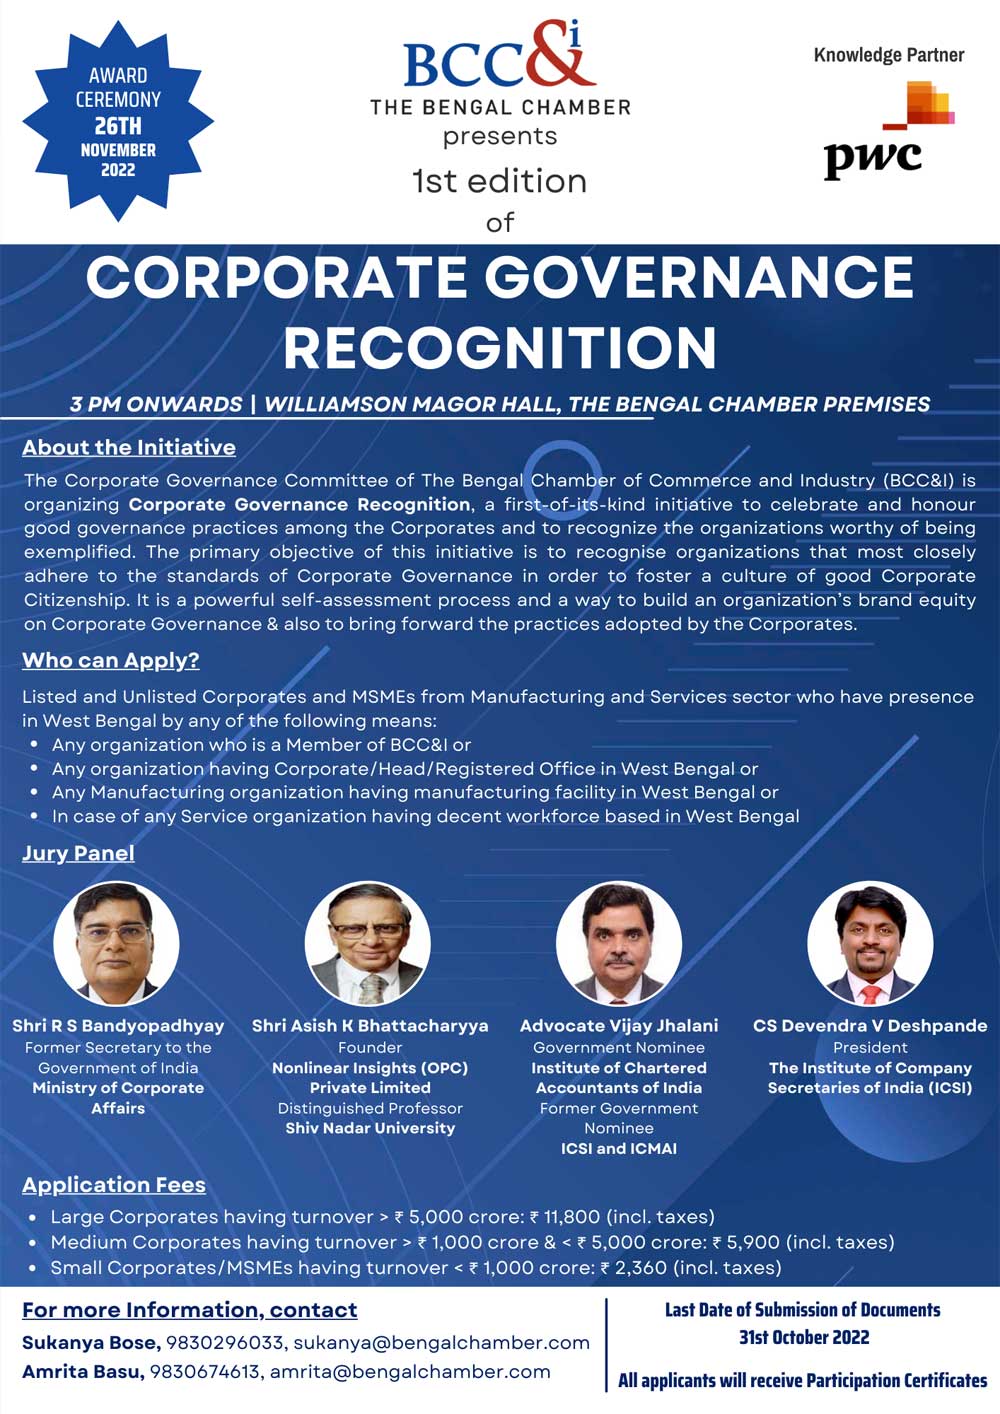 Corporate Governance Recognition